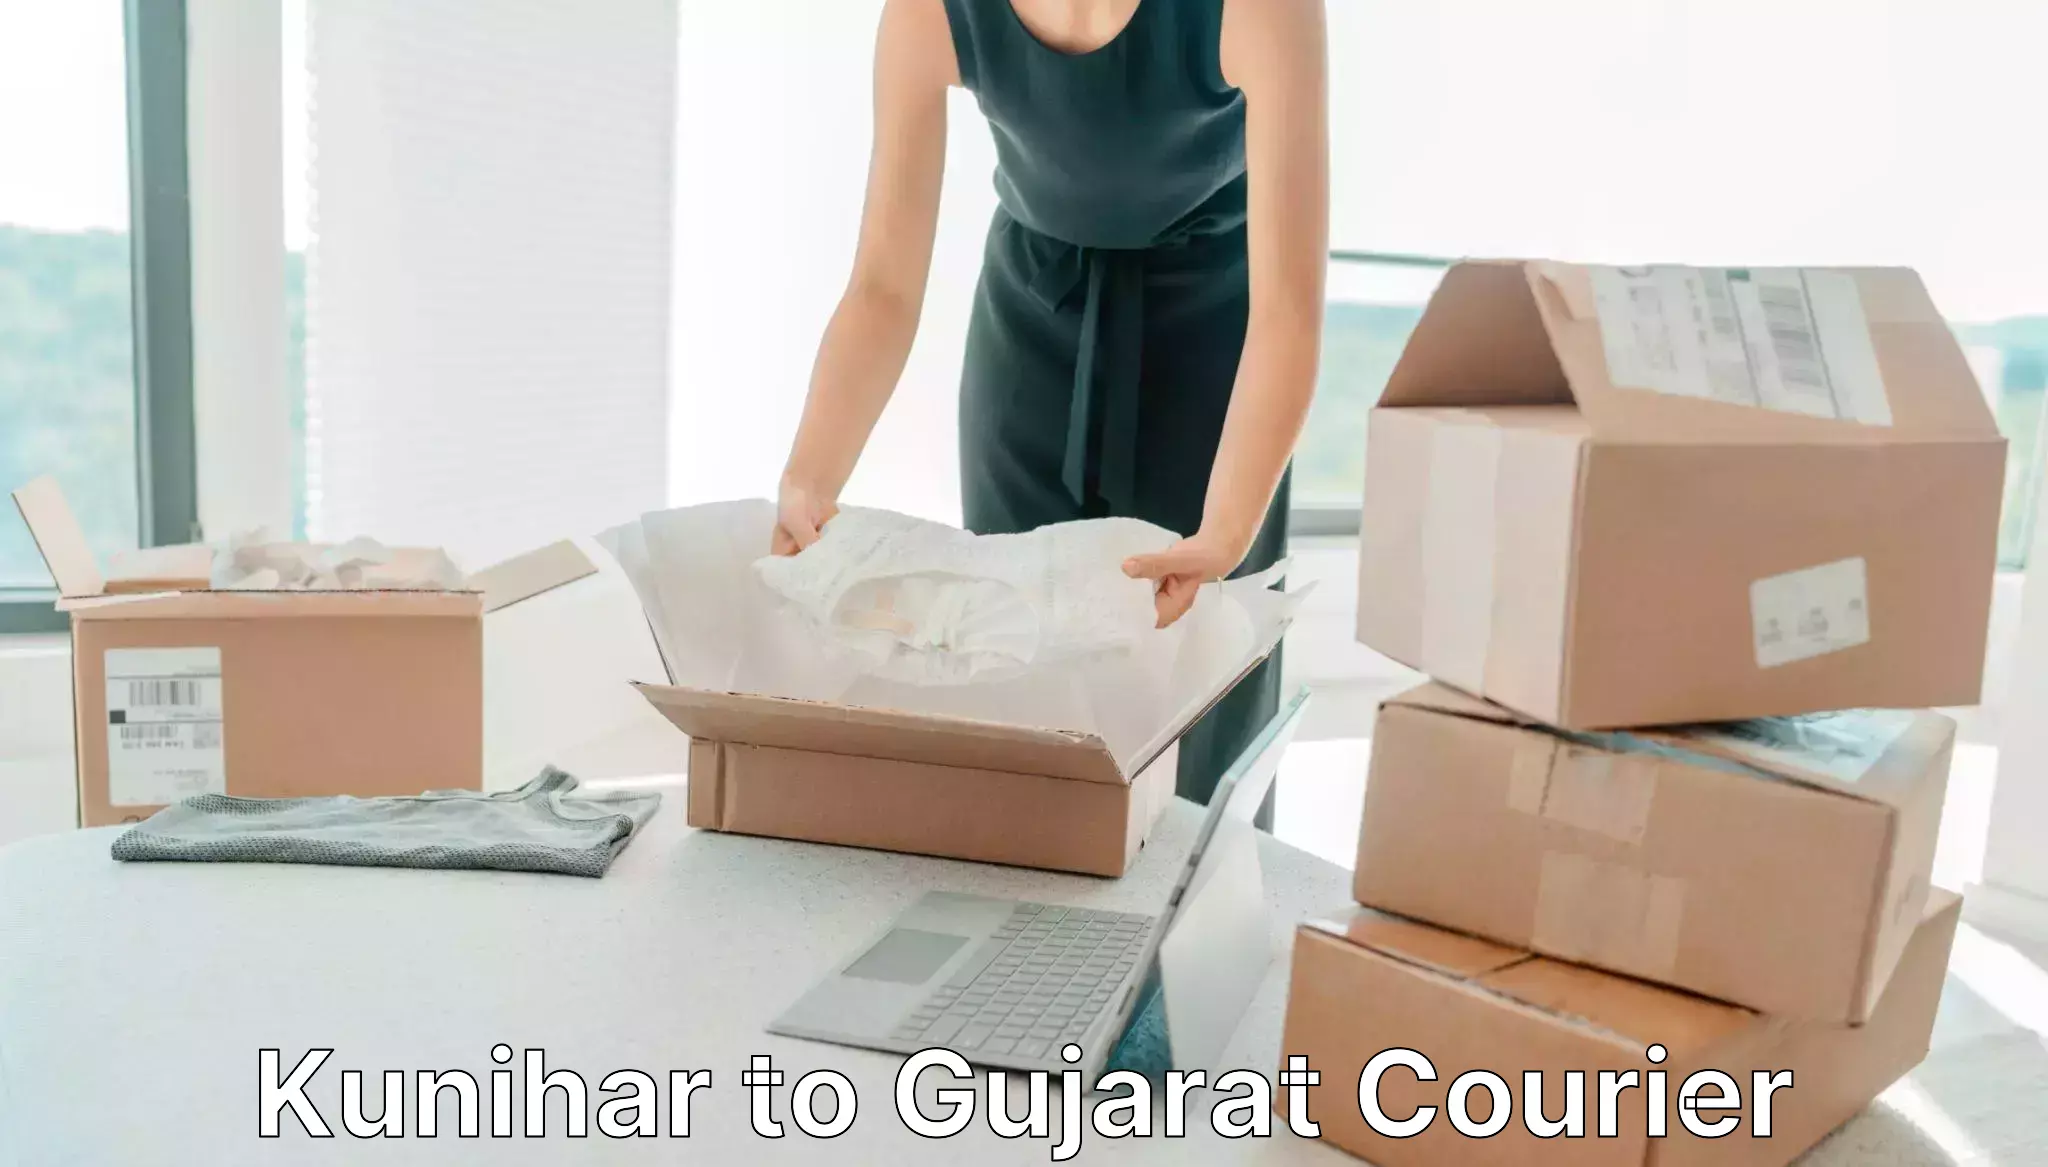 Easy access courier services Kunihar to Gujarat